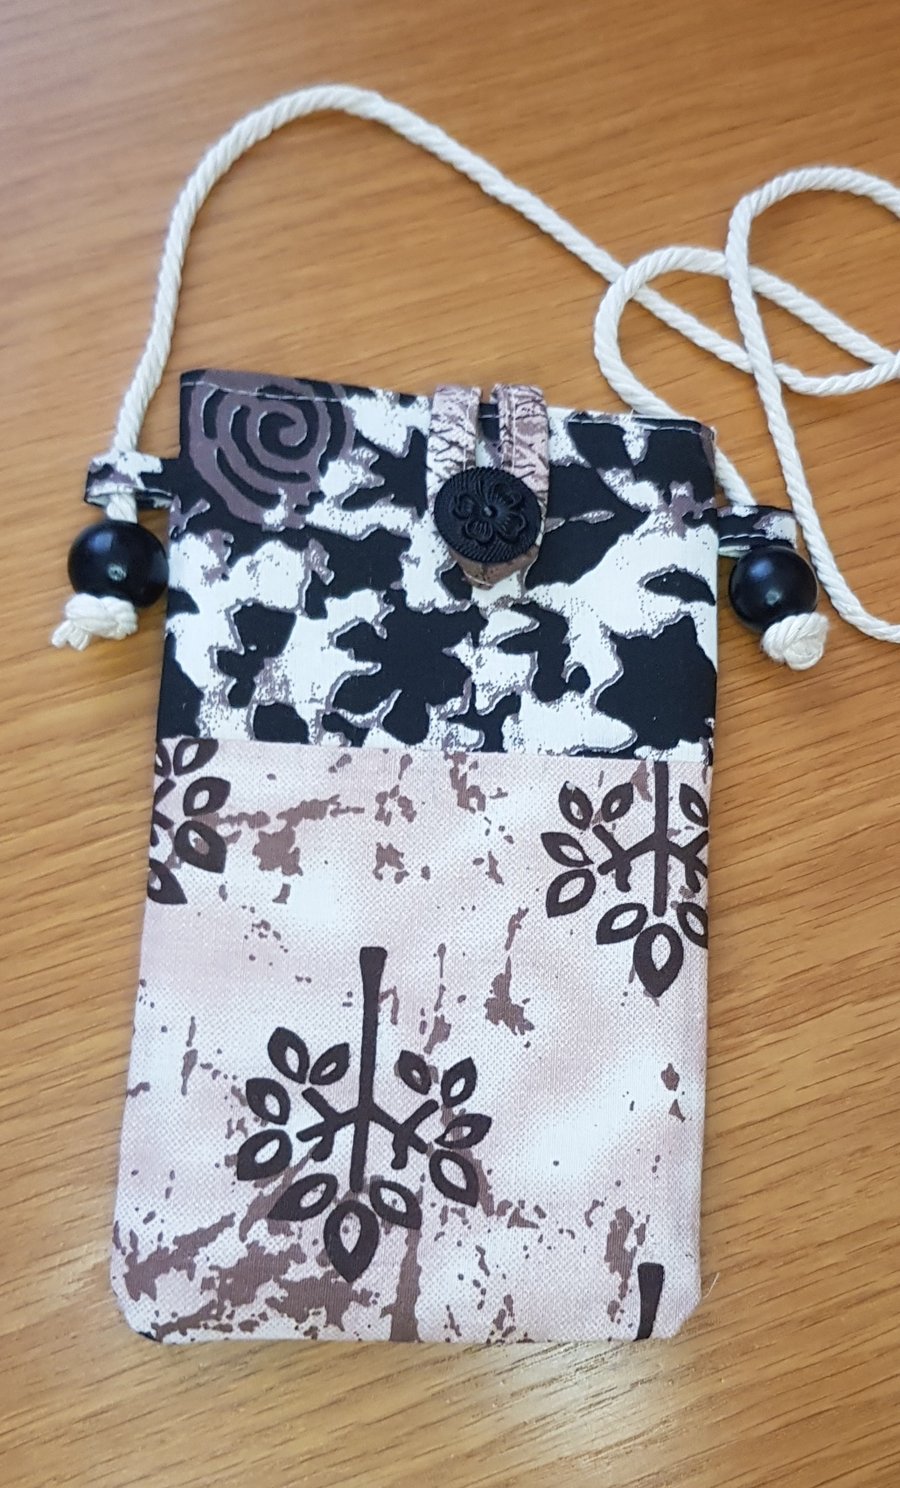 Indian block print fabric mobile phone pouch in black and brown prints